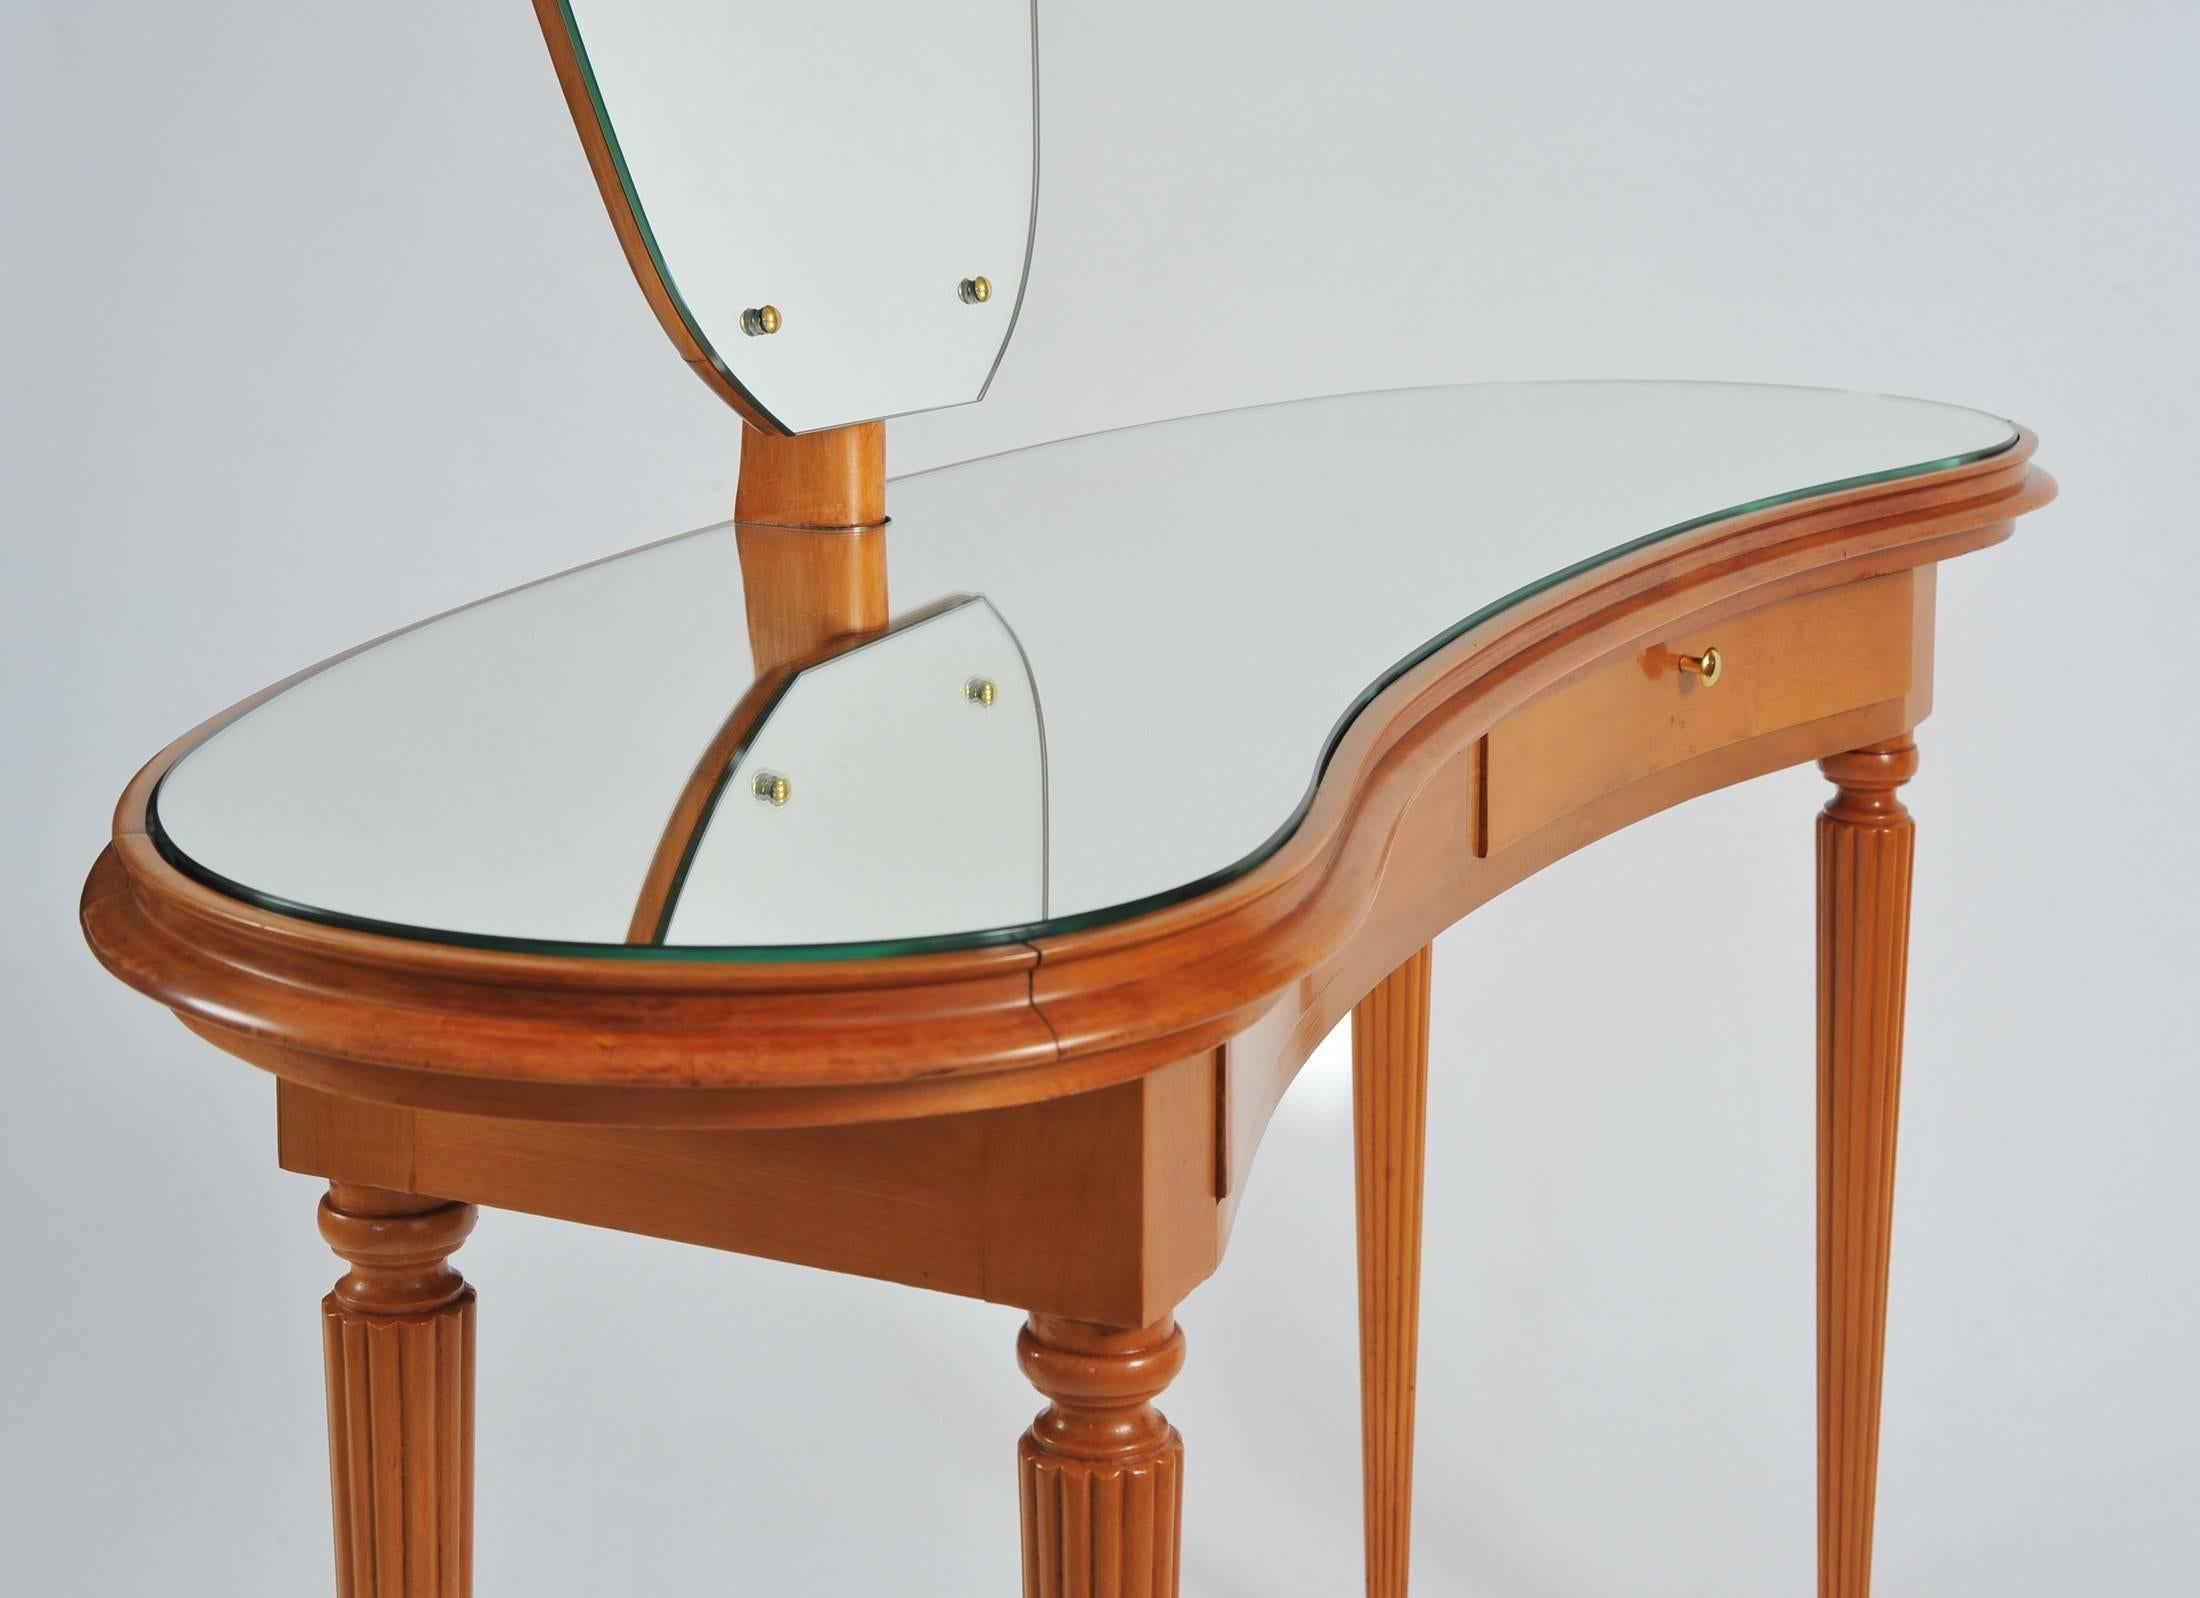 Two-drawer dressing-table in light fruit wood with large shaped mirror, on turned and fluted tapering legs.
The height given below is that of the tabletop. The height to the top of the mirror is 151cm.